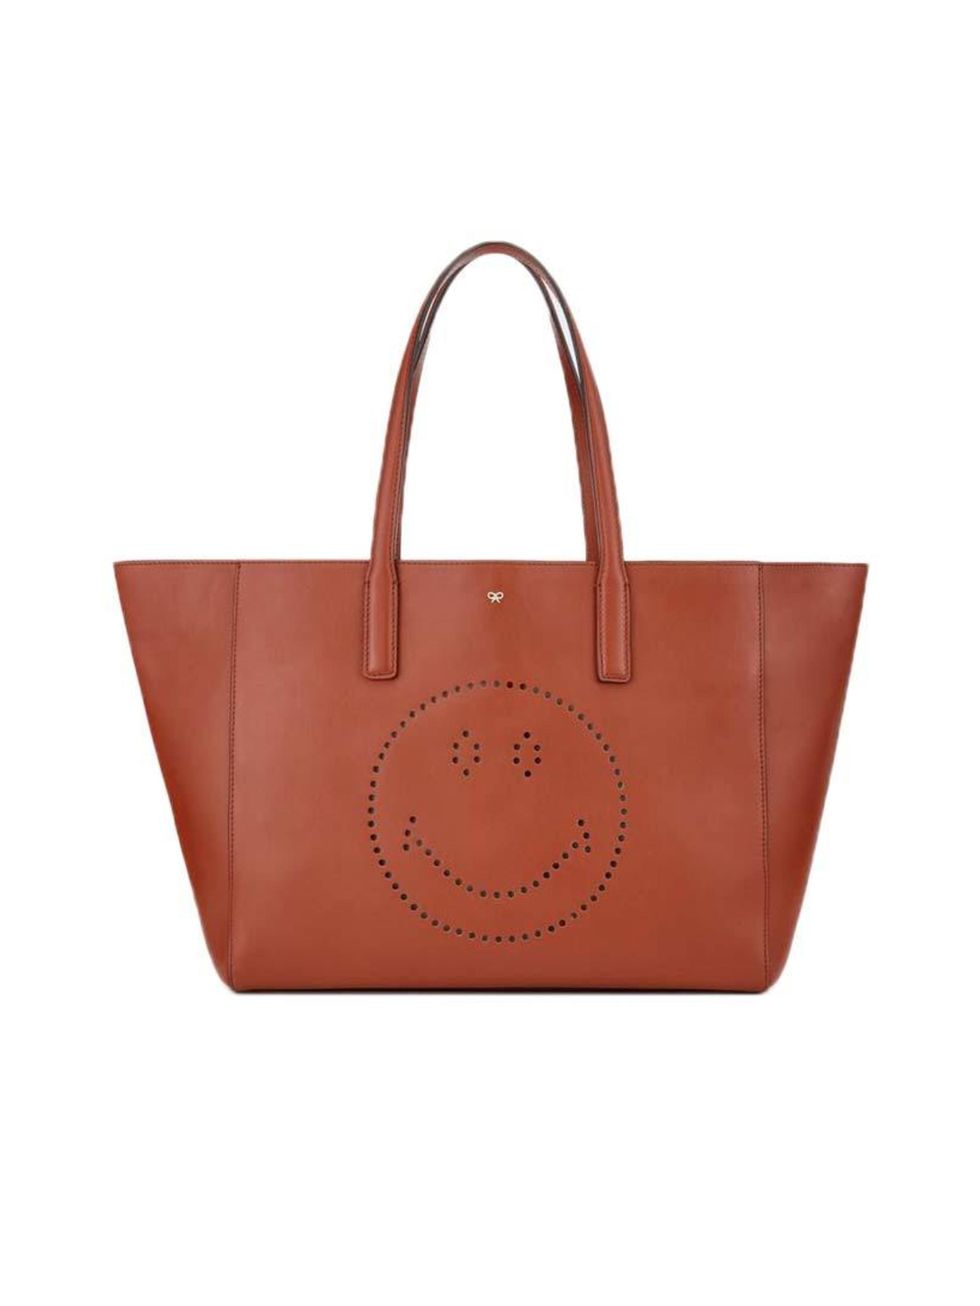 <p>Tote bag seeks companionship and more. GSOH a must.</p>

<p><a href="http://www.anyahindmarch.com/Just-Arrived/Smiley-Shopper-Featherweight-Ebury/Burnt-Orange-5050925893398.html?start=19&cgid=Just%20Arrived" target="_blank">Anya Hindmarch</a> bag, £795